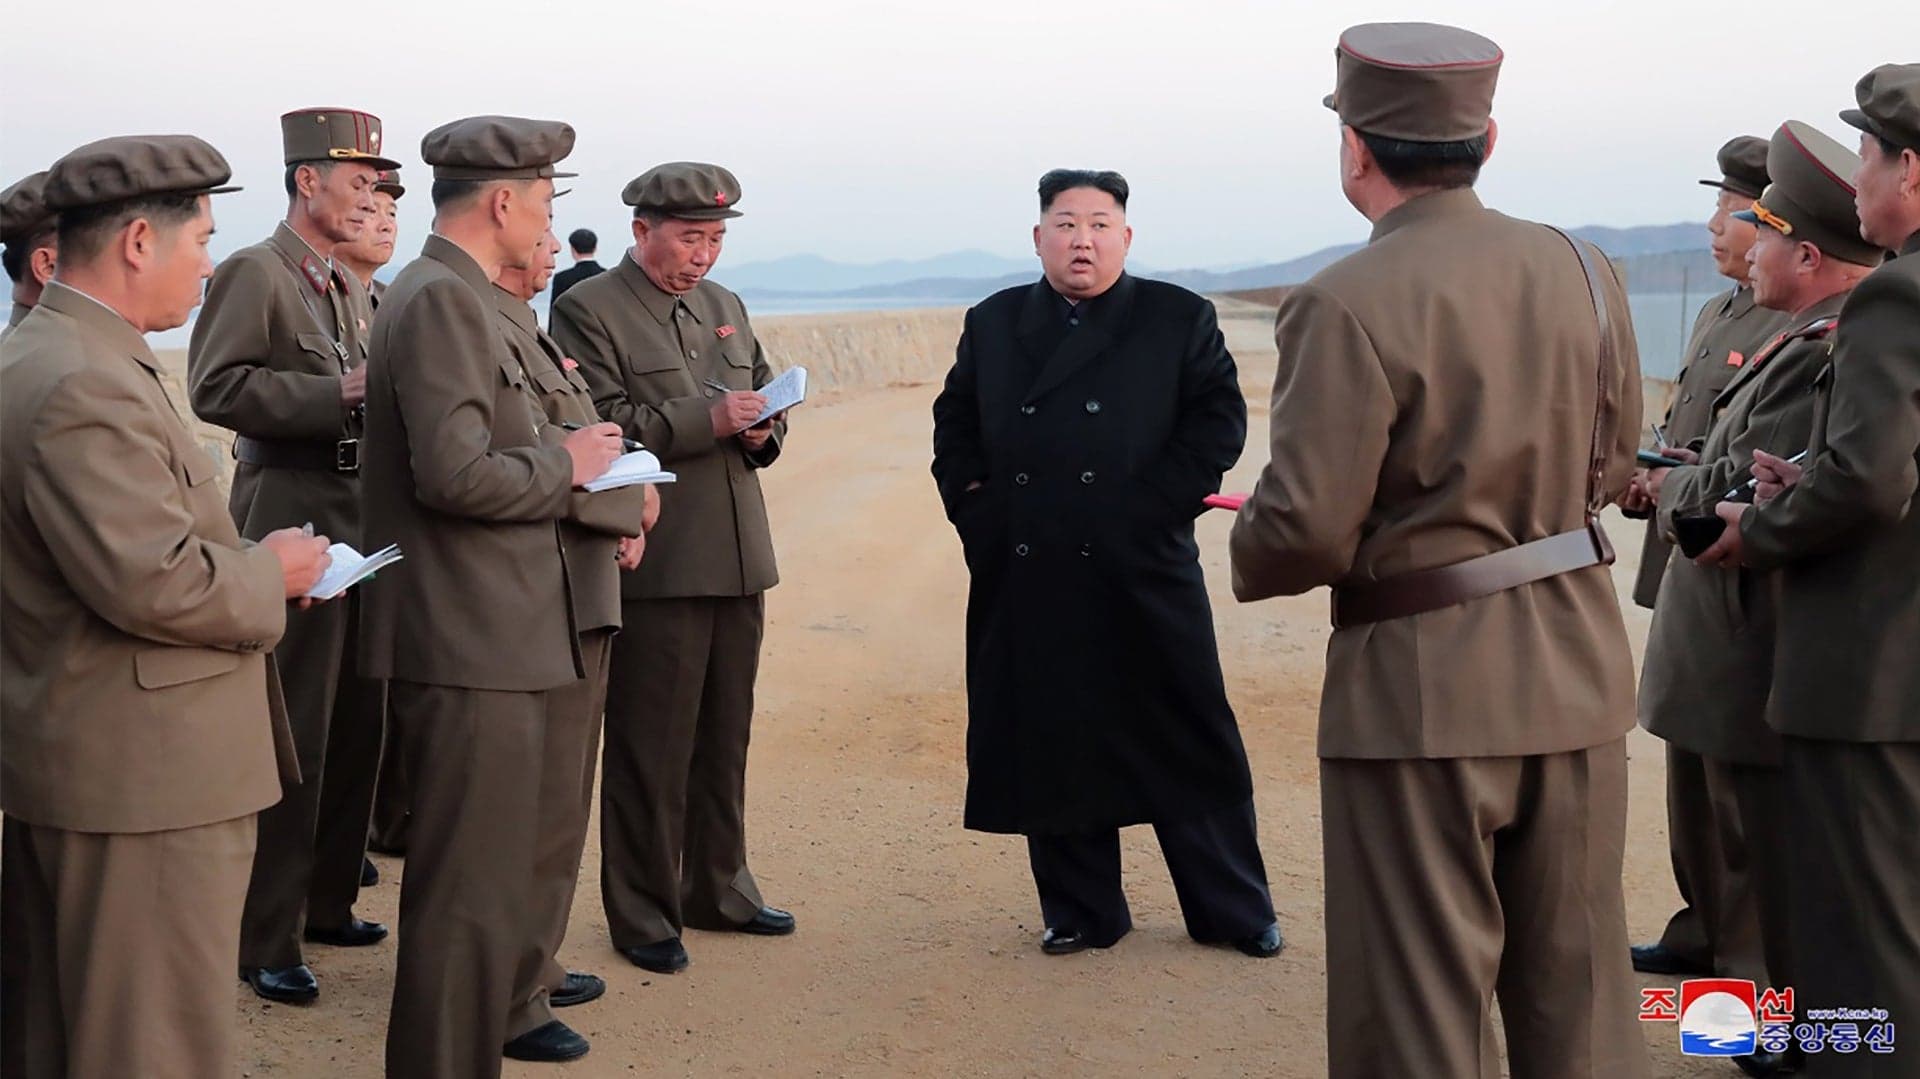 Not A Surprise: North Korea Is Back To Publicizing Weapons Tests Overseen By Kim Jong Un